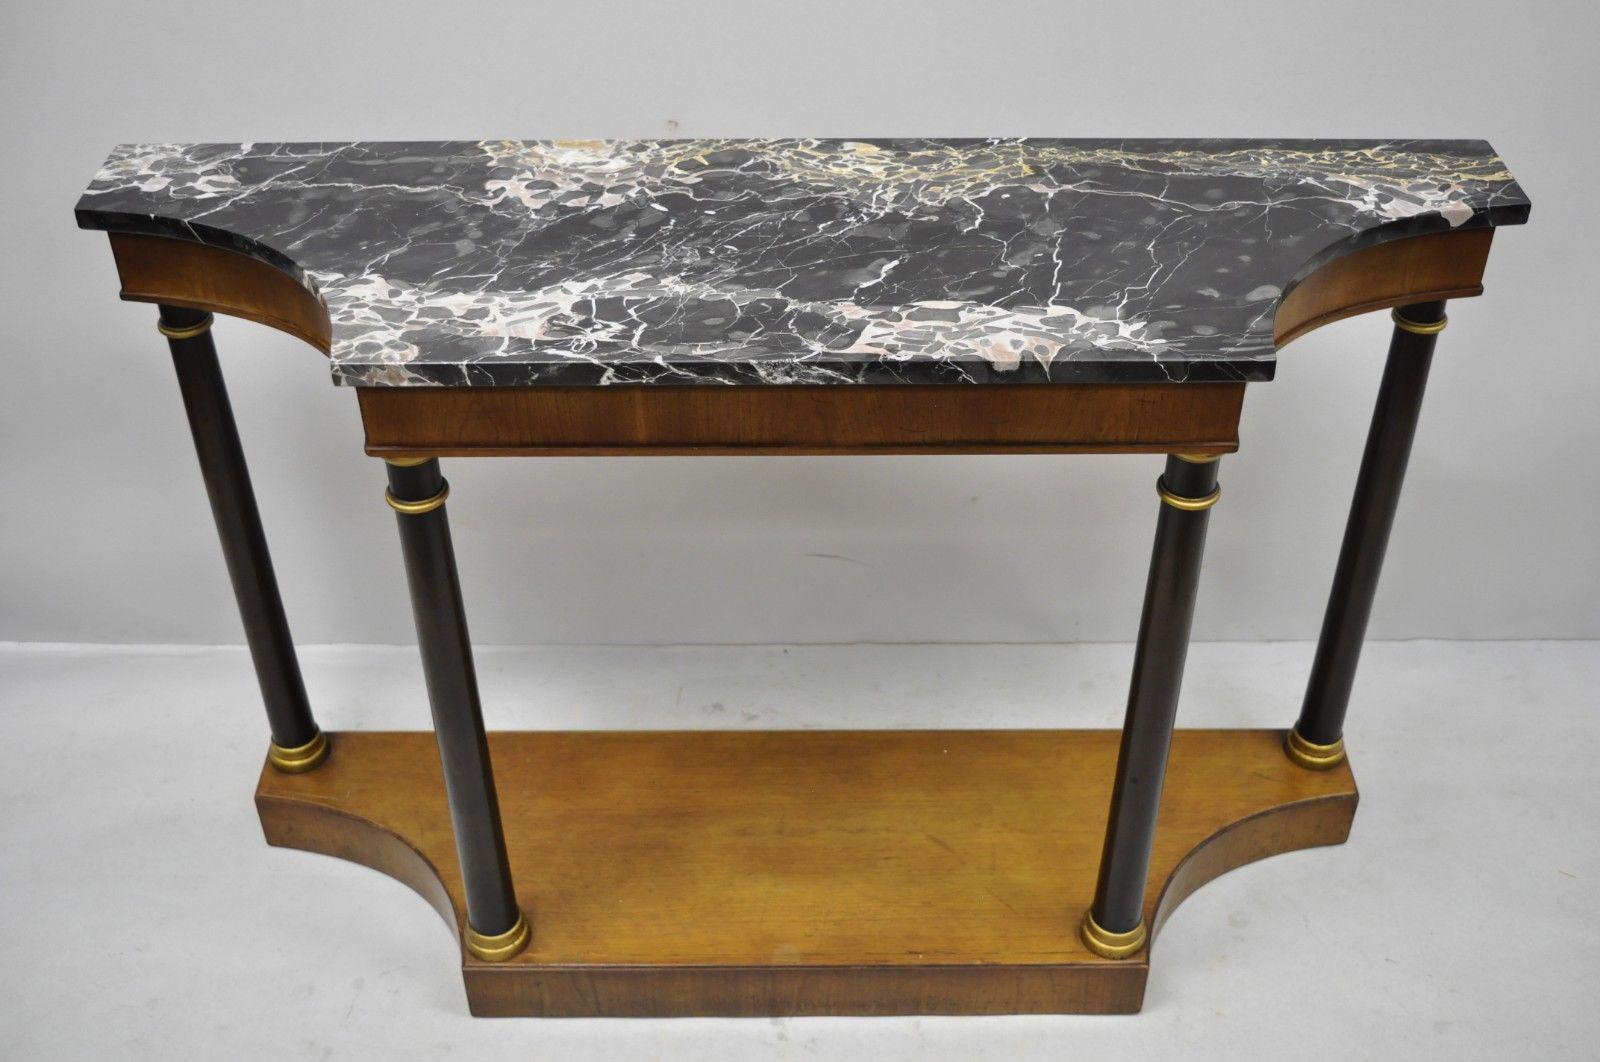 French Empire style marble-top console hall table with columns by Fine Arts Furniture. Item features shaped marble top, black and gold painted column supports, original tag, great style and form, circa early to mid-20th century. Measurements: 32